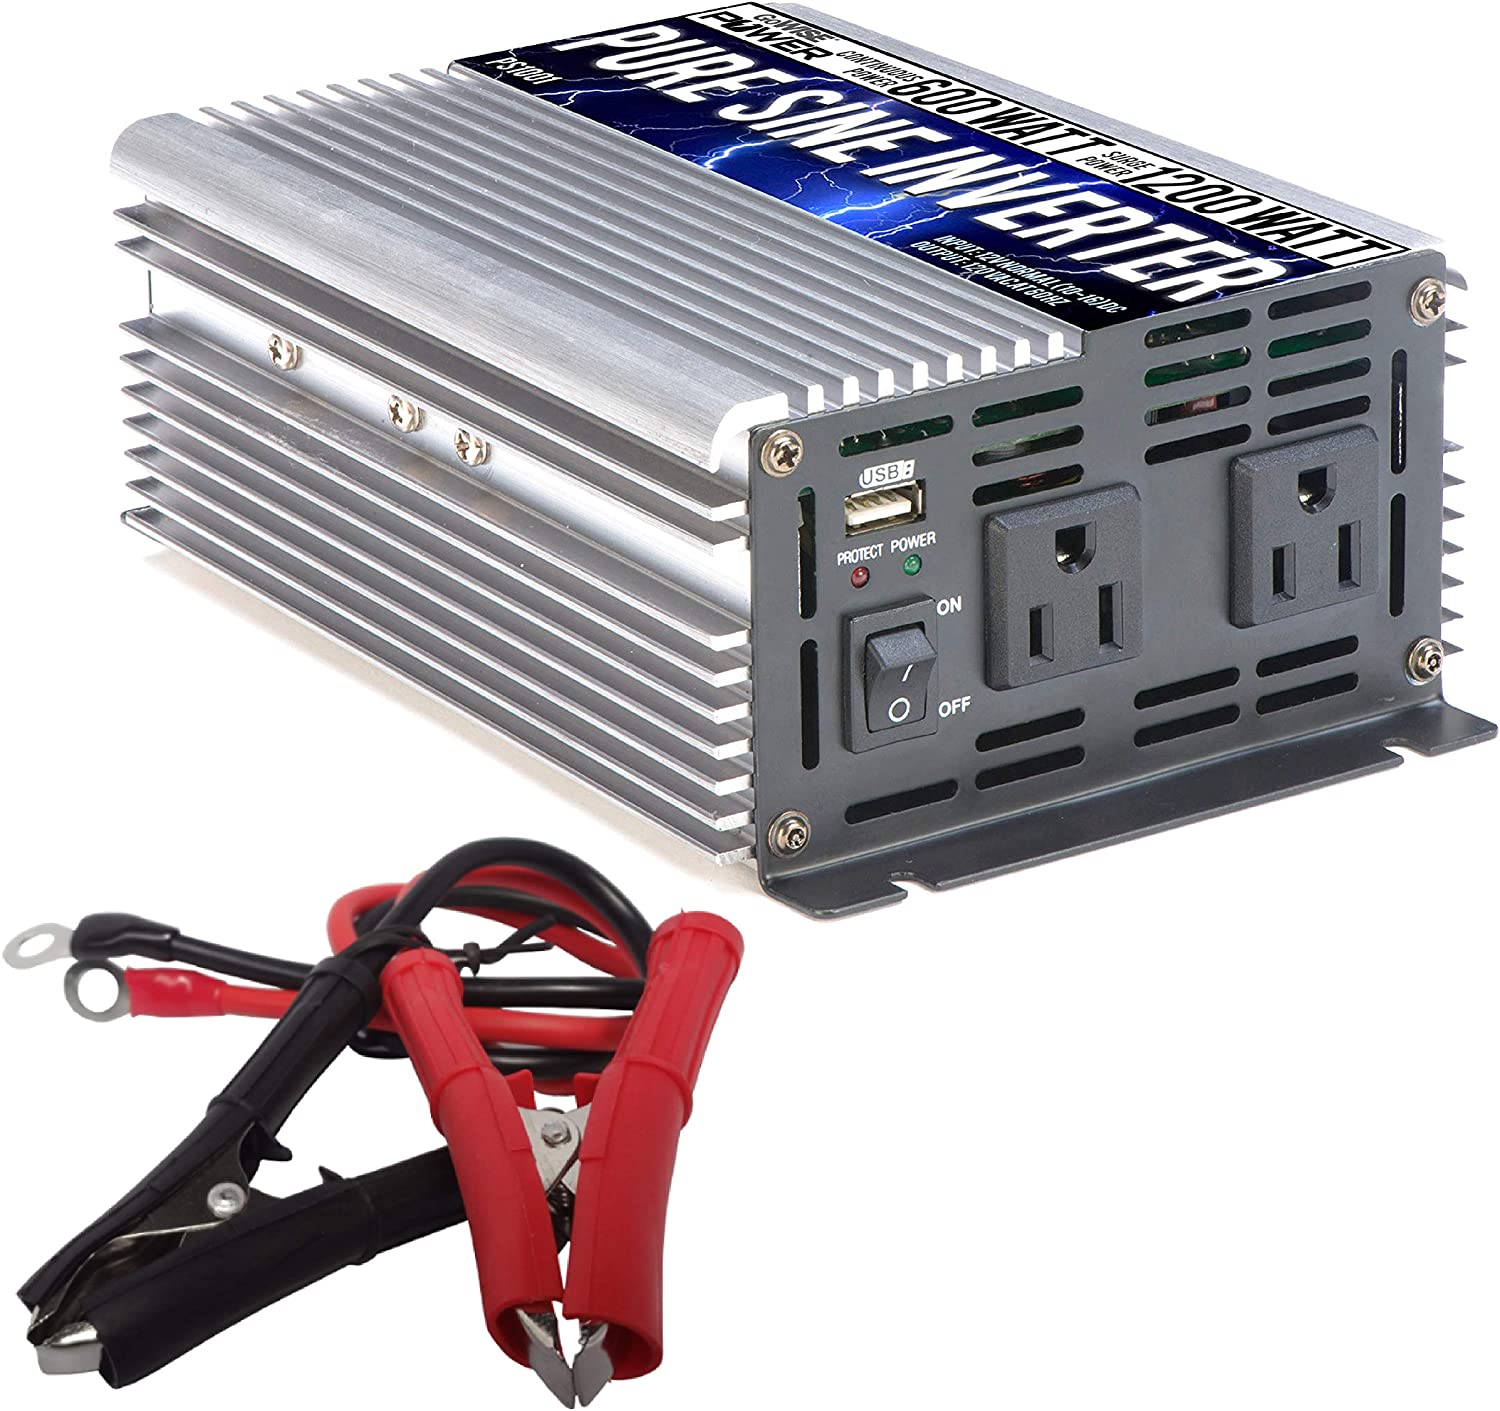 GoWISE Power 600W Pure Sine Wave Inverter 12V DC to 120V AC with 2 AC Outlets + 1 5V USB Port and 2 Clamp Cables (1200W Peak) PS1001